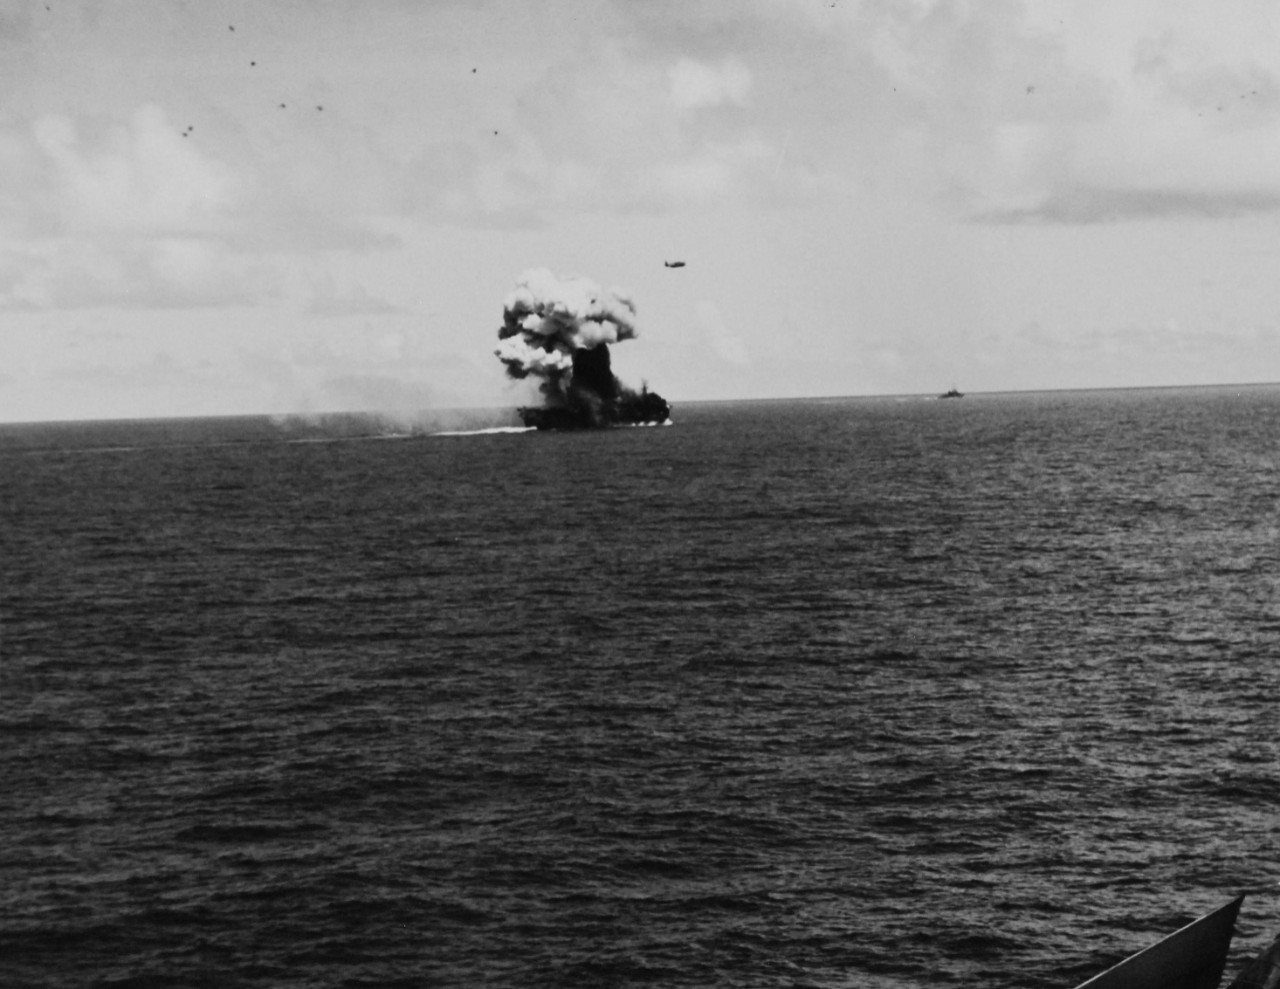 80-G-270618:   USS Suwannee (CVE-27), October 26, 1944.   Fires and explosion on the flight deck of USS Suwannee (CVL-27), resulting from a suicide hit of a Japanese “Zero” near Leyte, Philippines.   The airborne plane is friendly.   Taken from USS Sangamon (CVL-26) at Leyte, Philippines.  Official U.S. Navy photograph, now in the collections of the National Archives.  